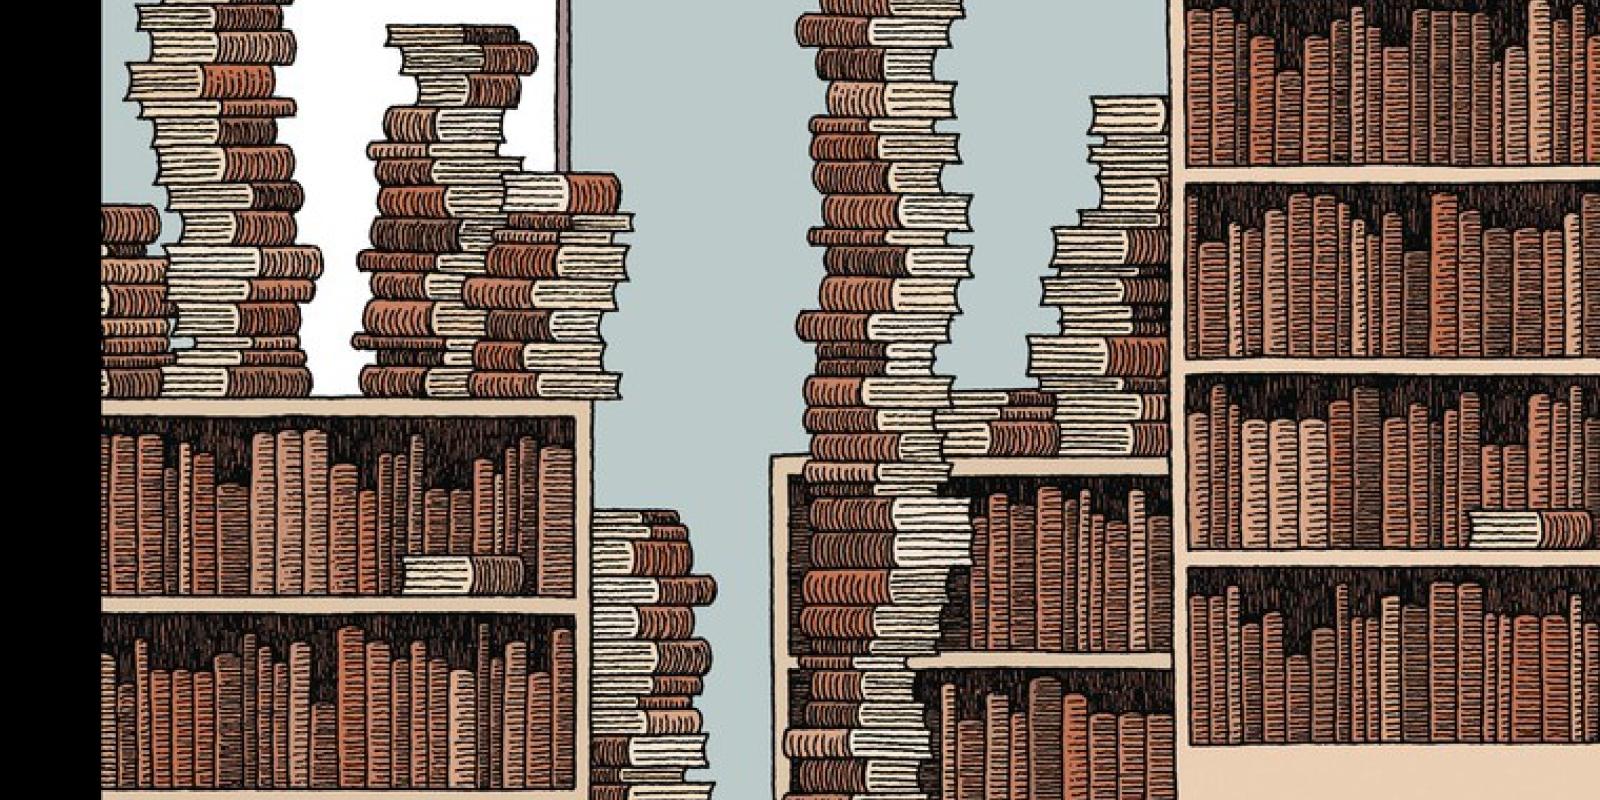 Cultural Commodities: Books from The New Yorker